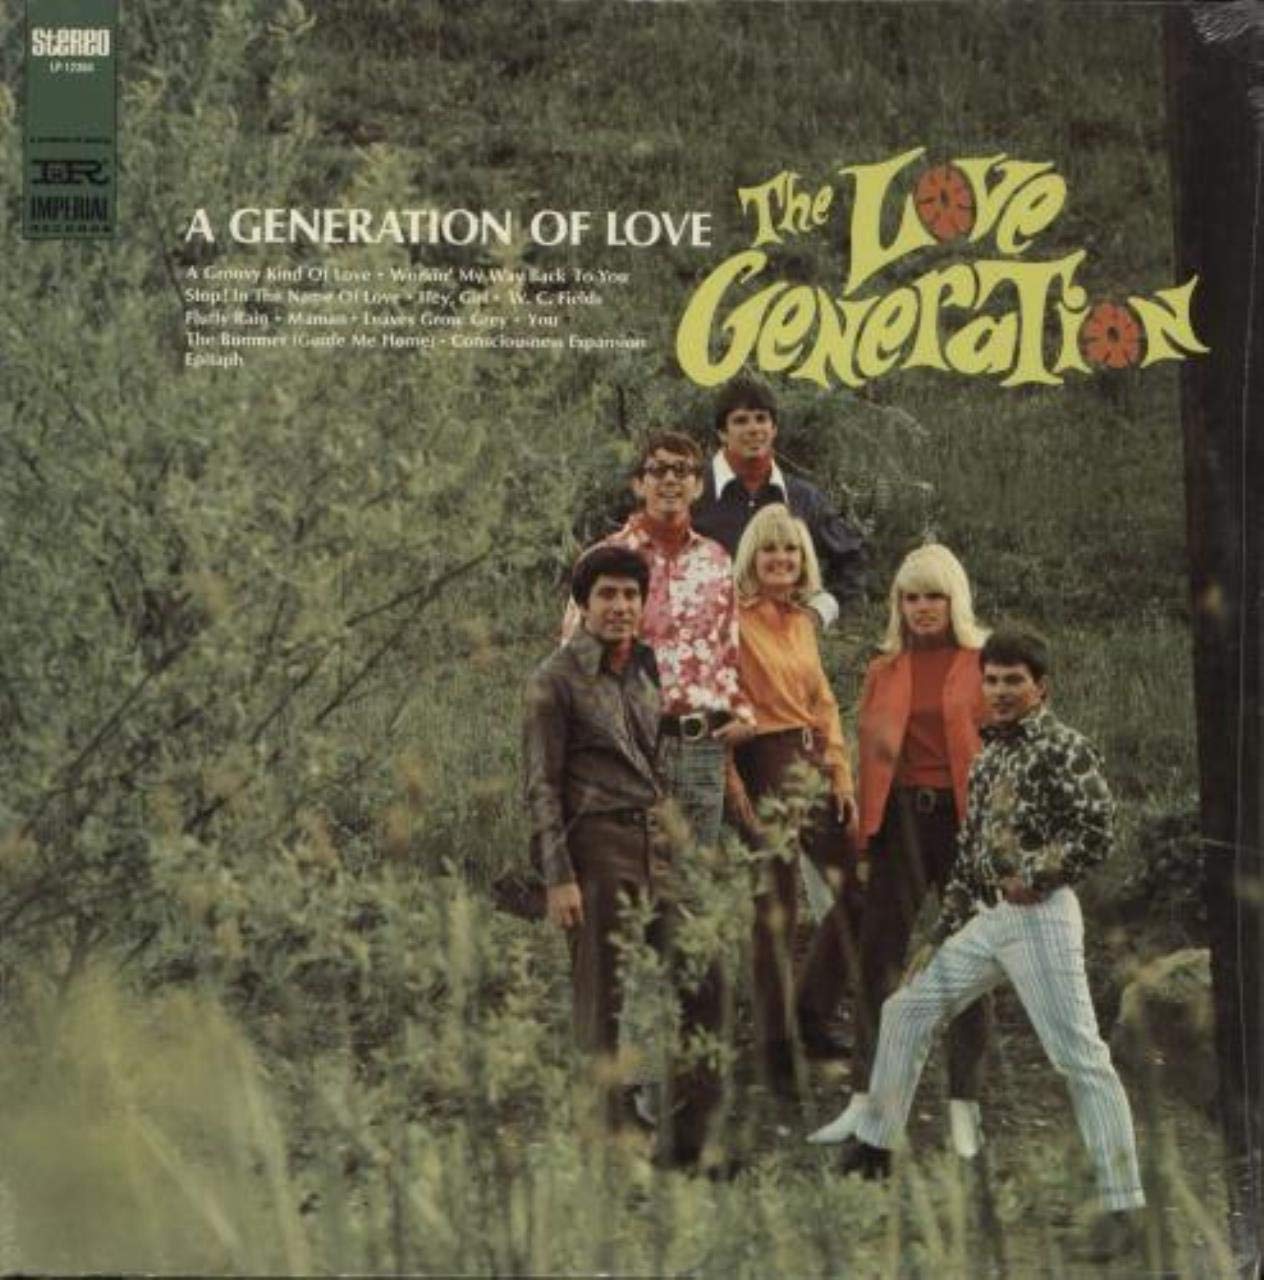 A Generation Of Love - Sealed